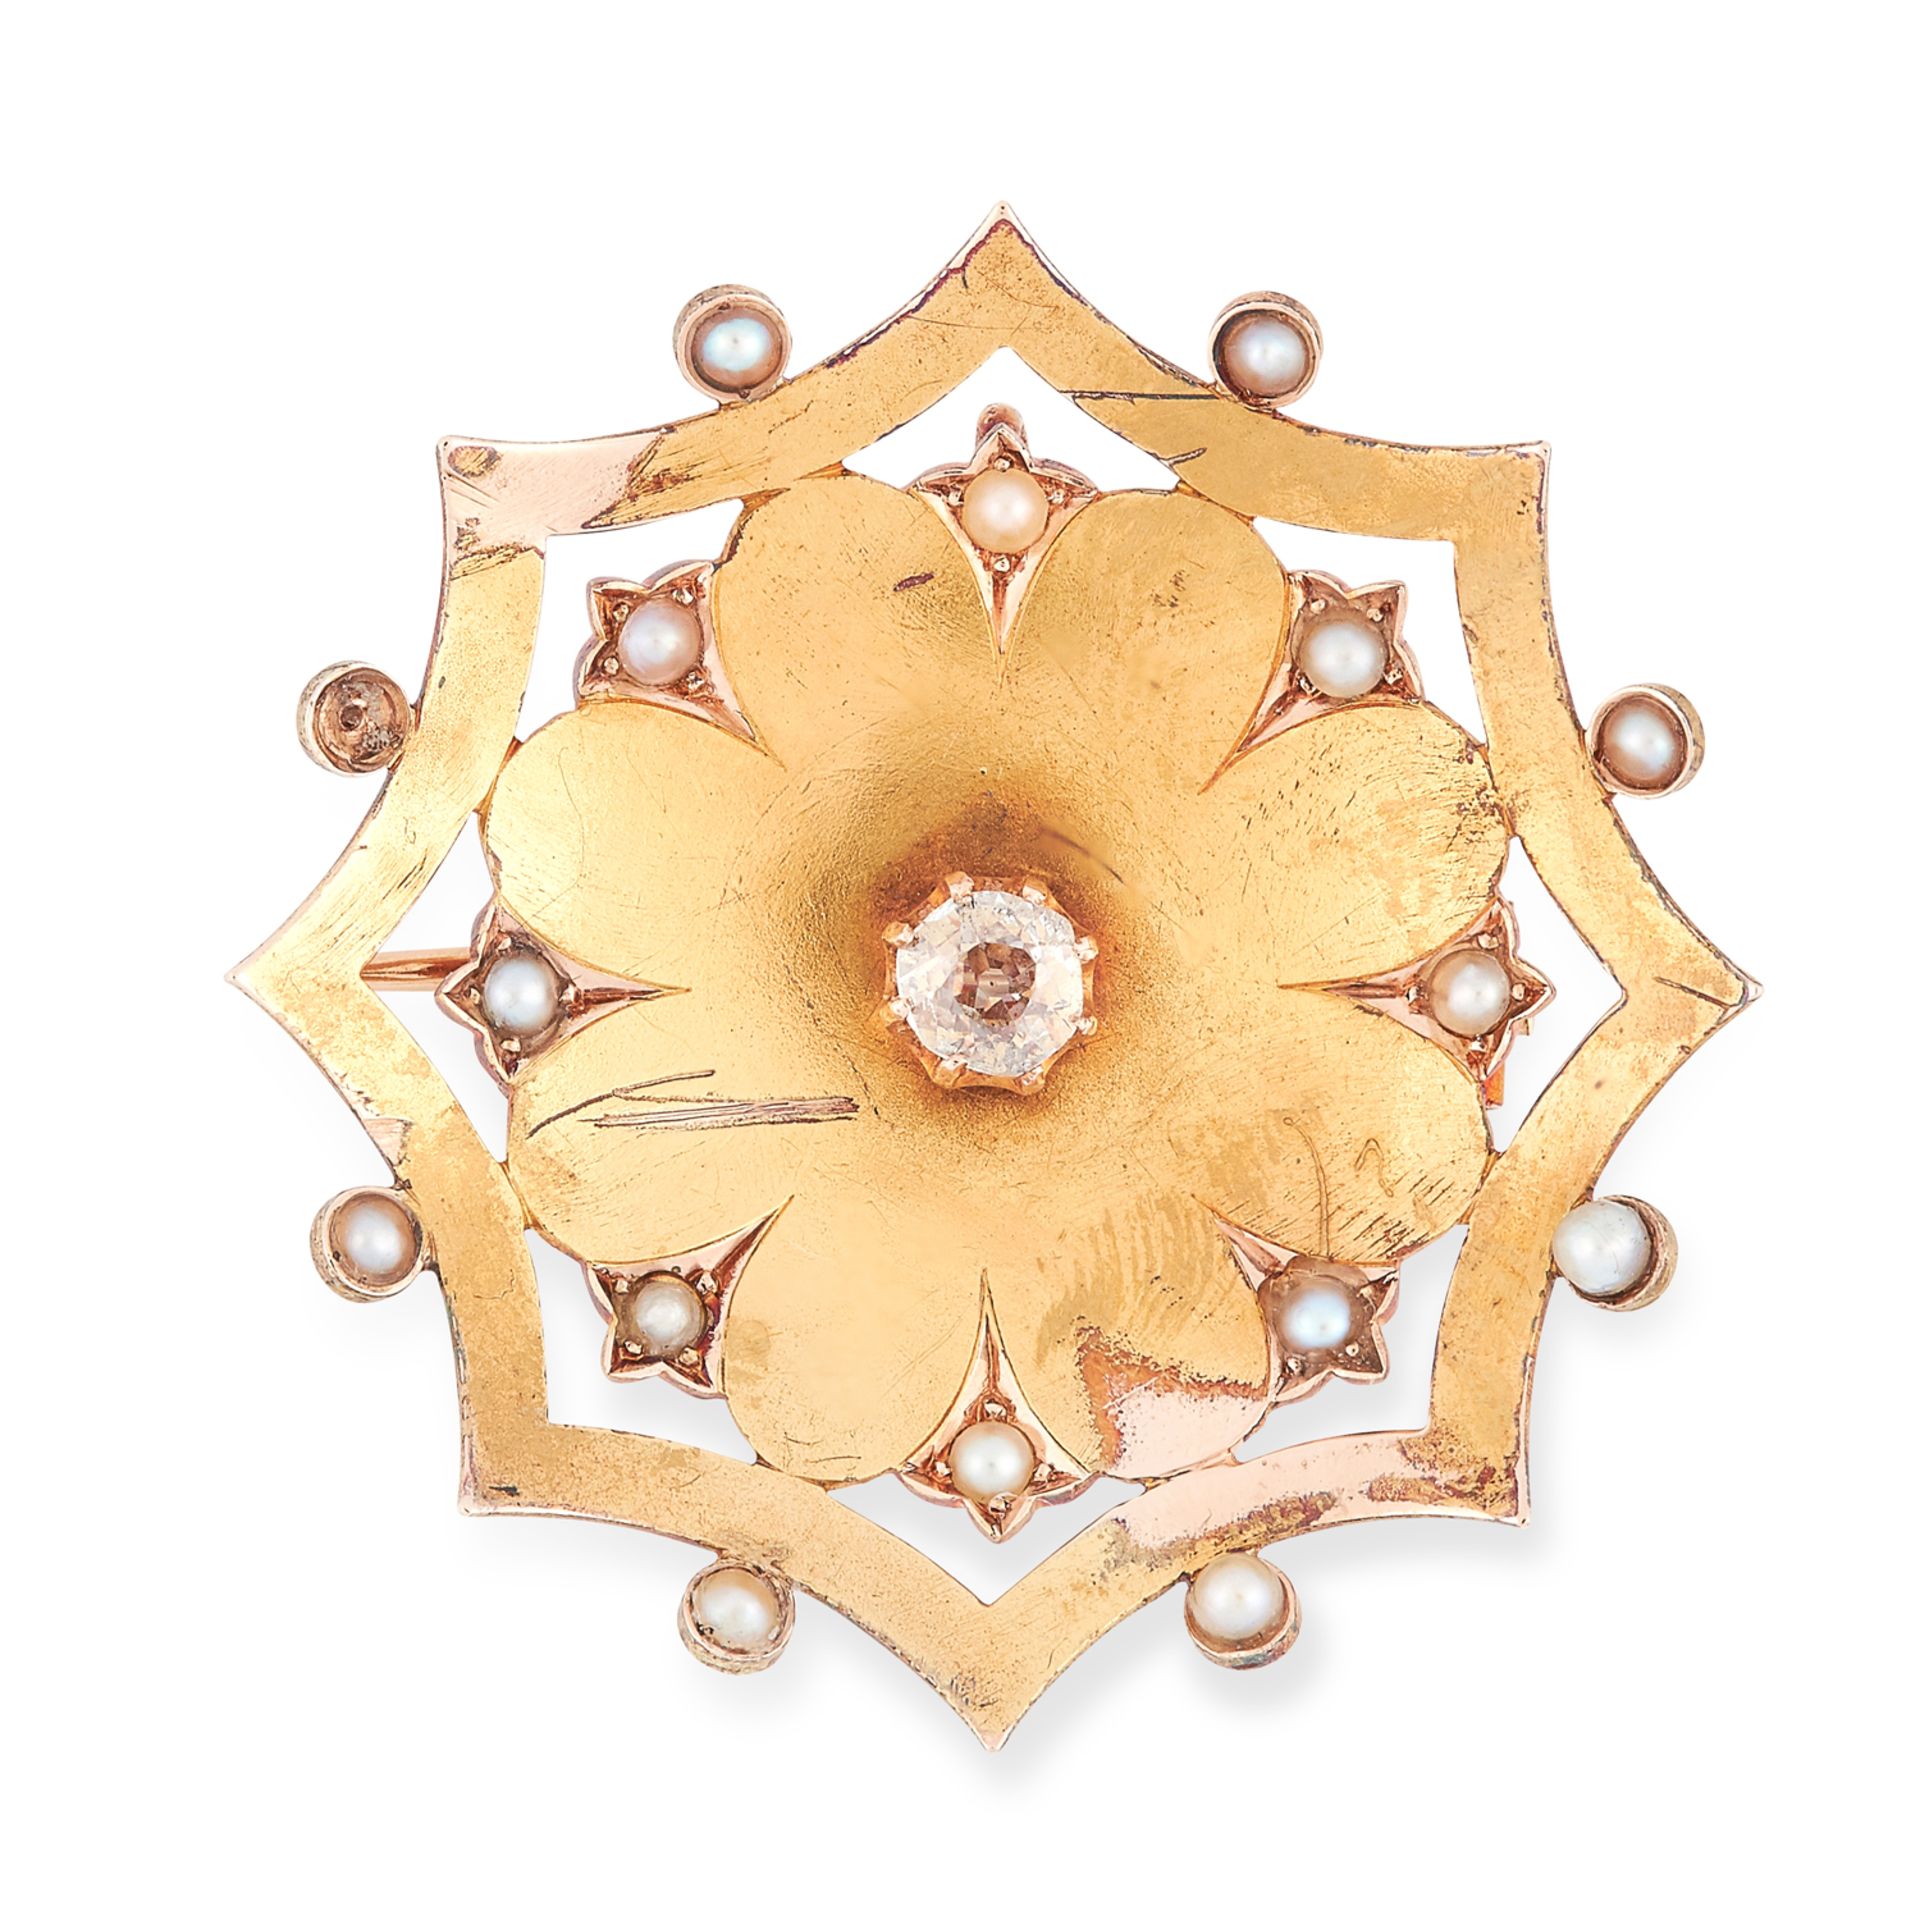 A DIAMOND AND PEARL BROOCH in floral design, set with a central round old cut diamond of 0.40 carats